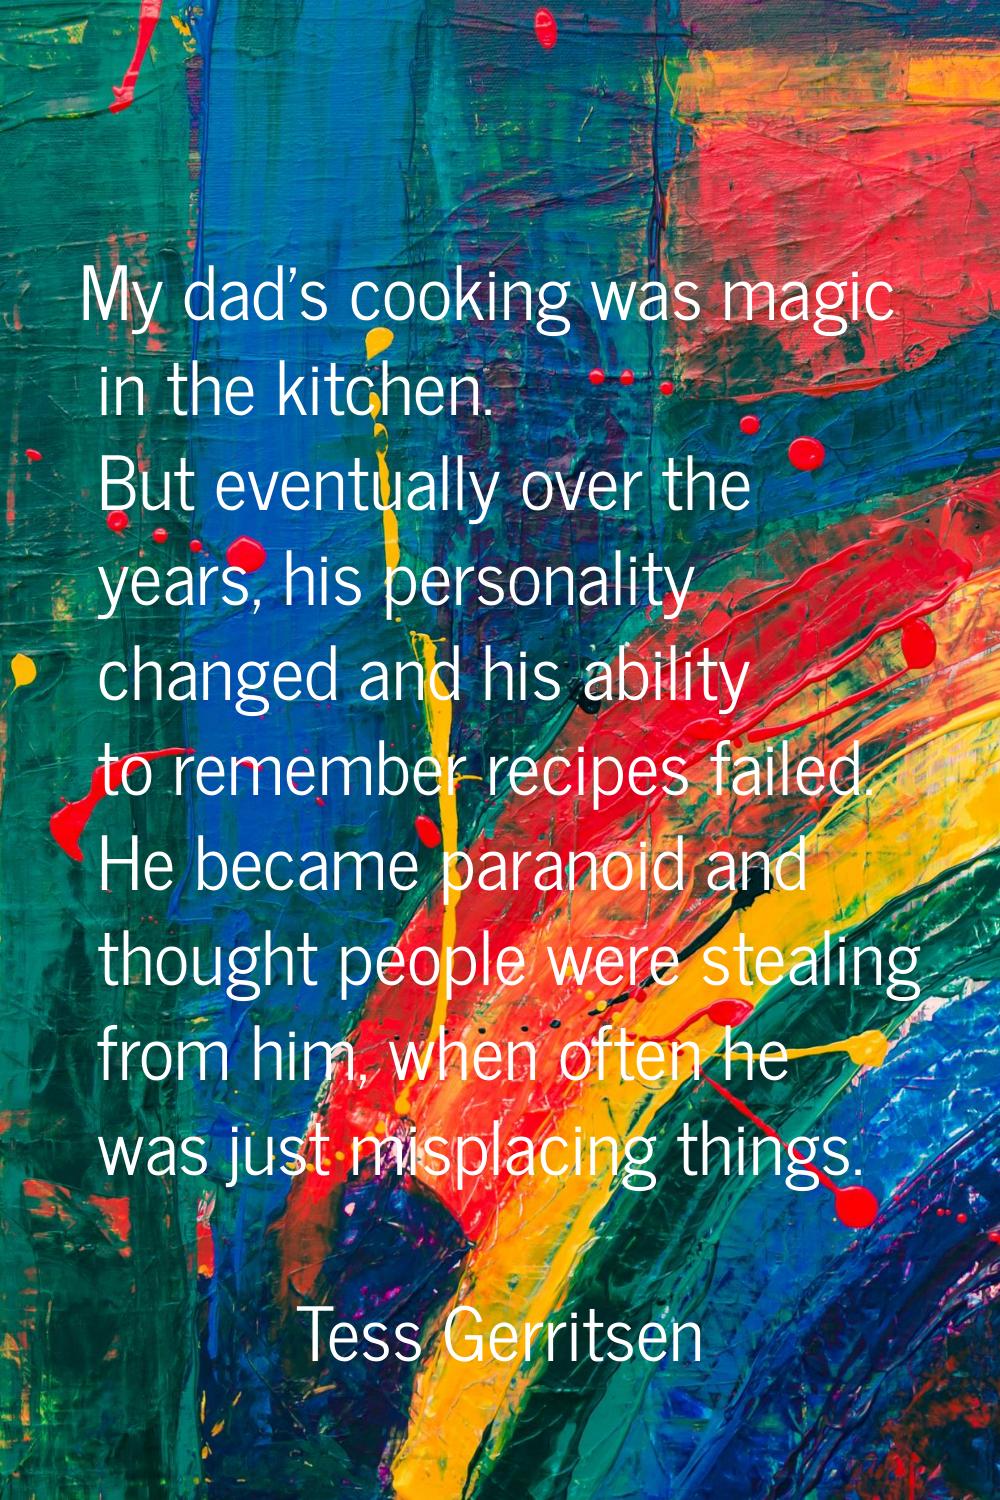 My dad's cooking was magic in the kitchen. But eventually over the years, his personality changed a